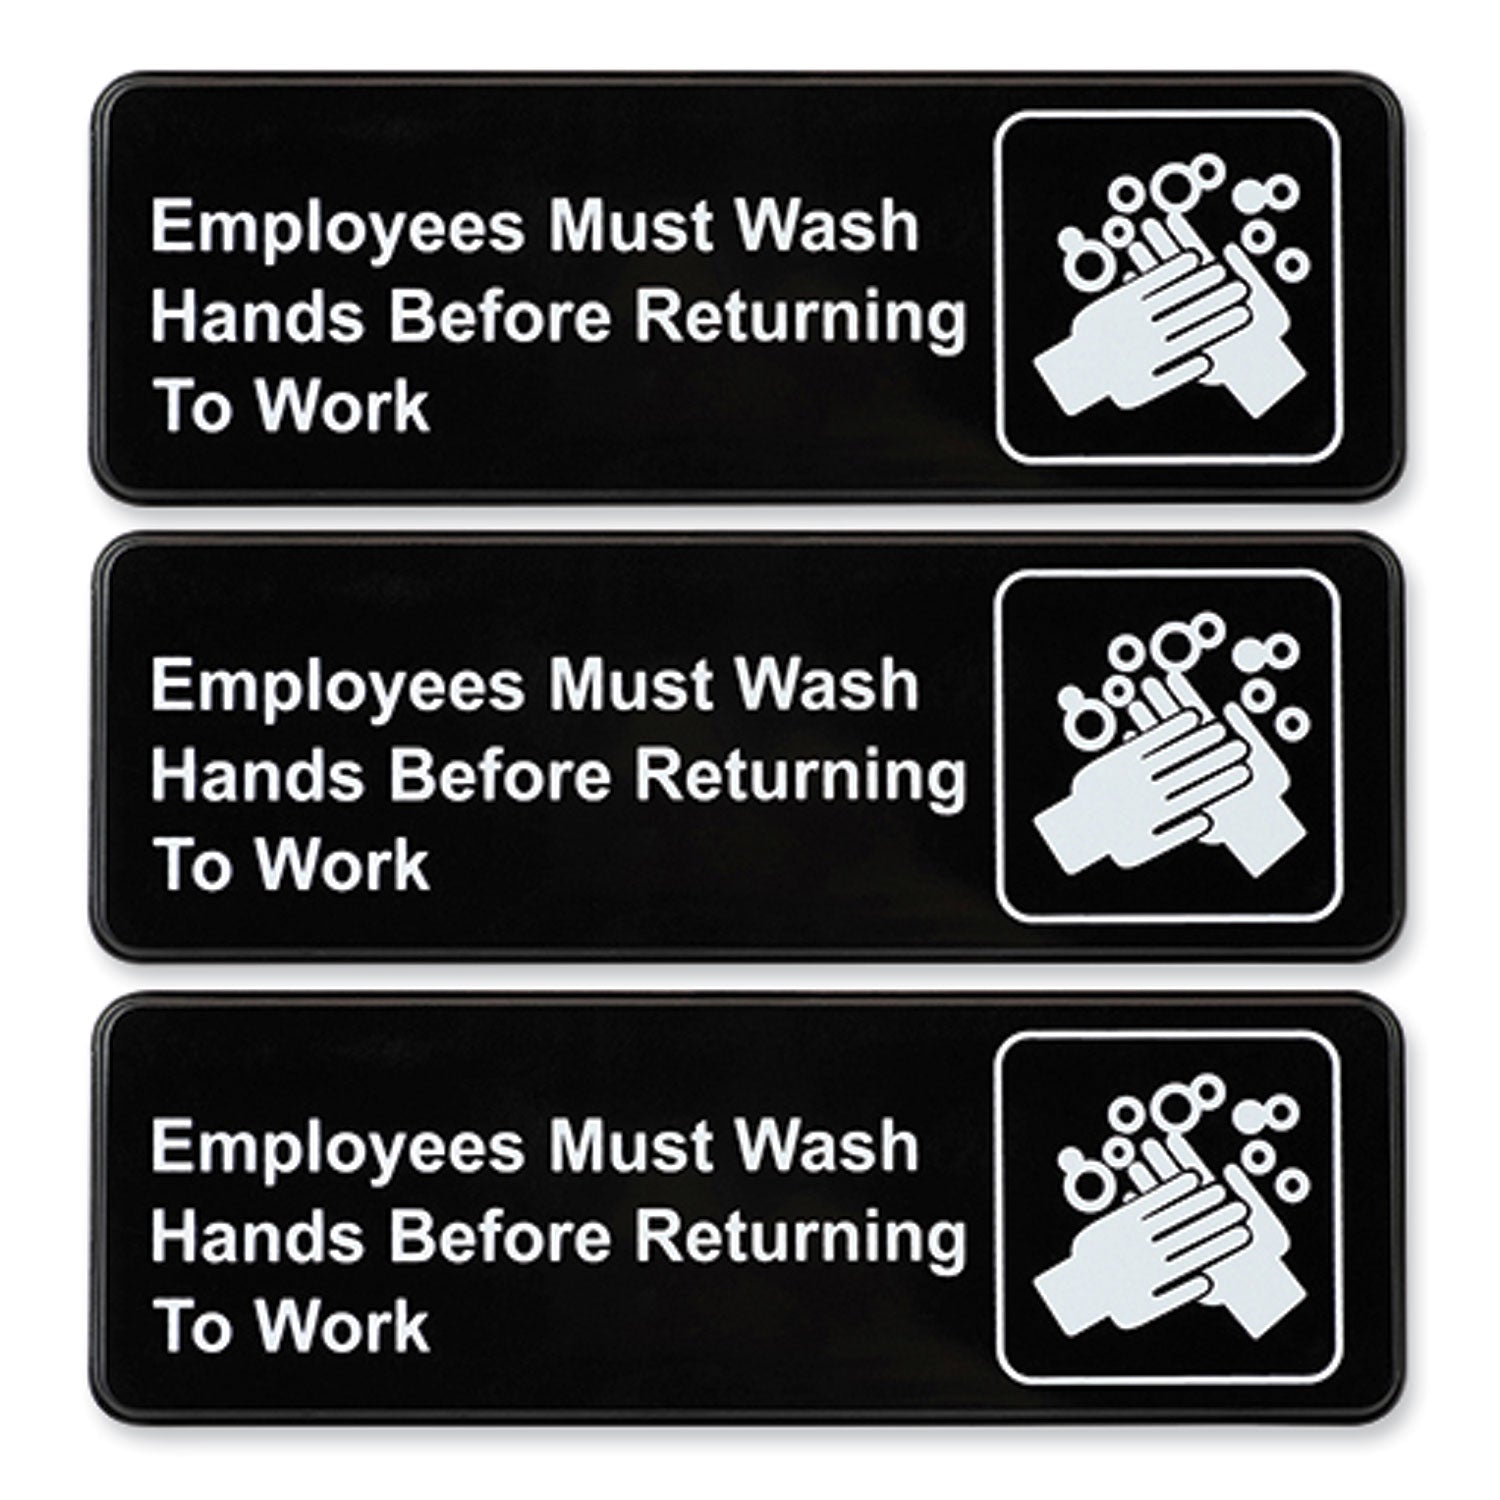 indoor-outdoor-restroom-with-braille-text-6-x-9-black-face-white-graphics-3-pack_exohd0049s - 1